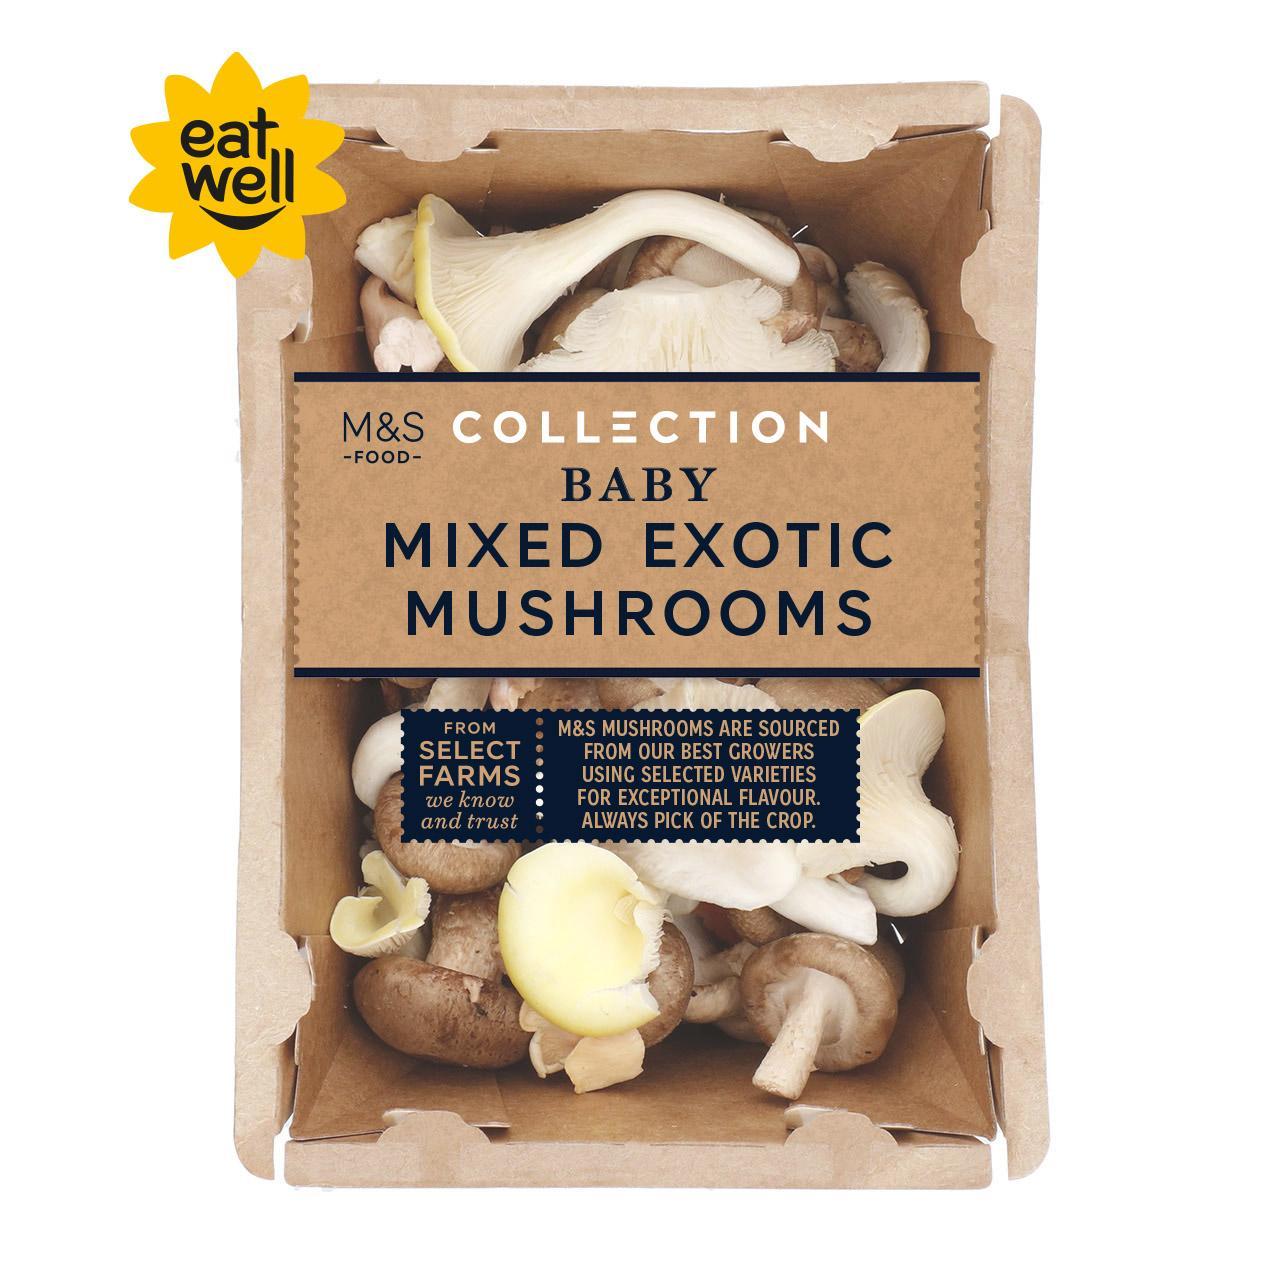 M&S Collection Baby Mixed Exotic Mushrooms